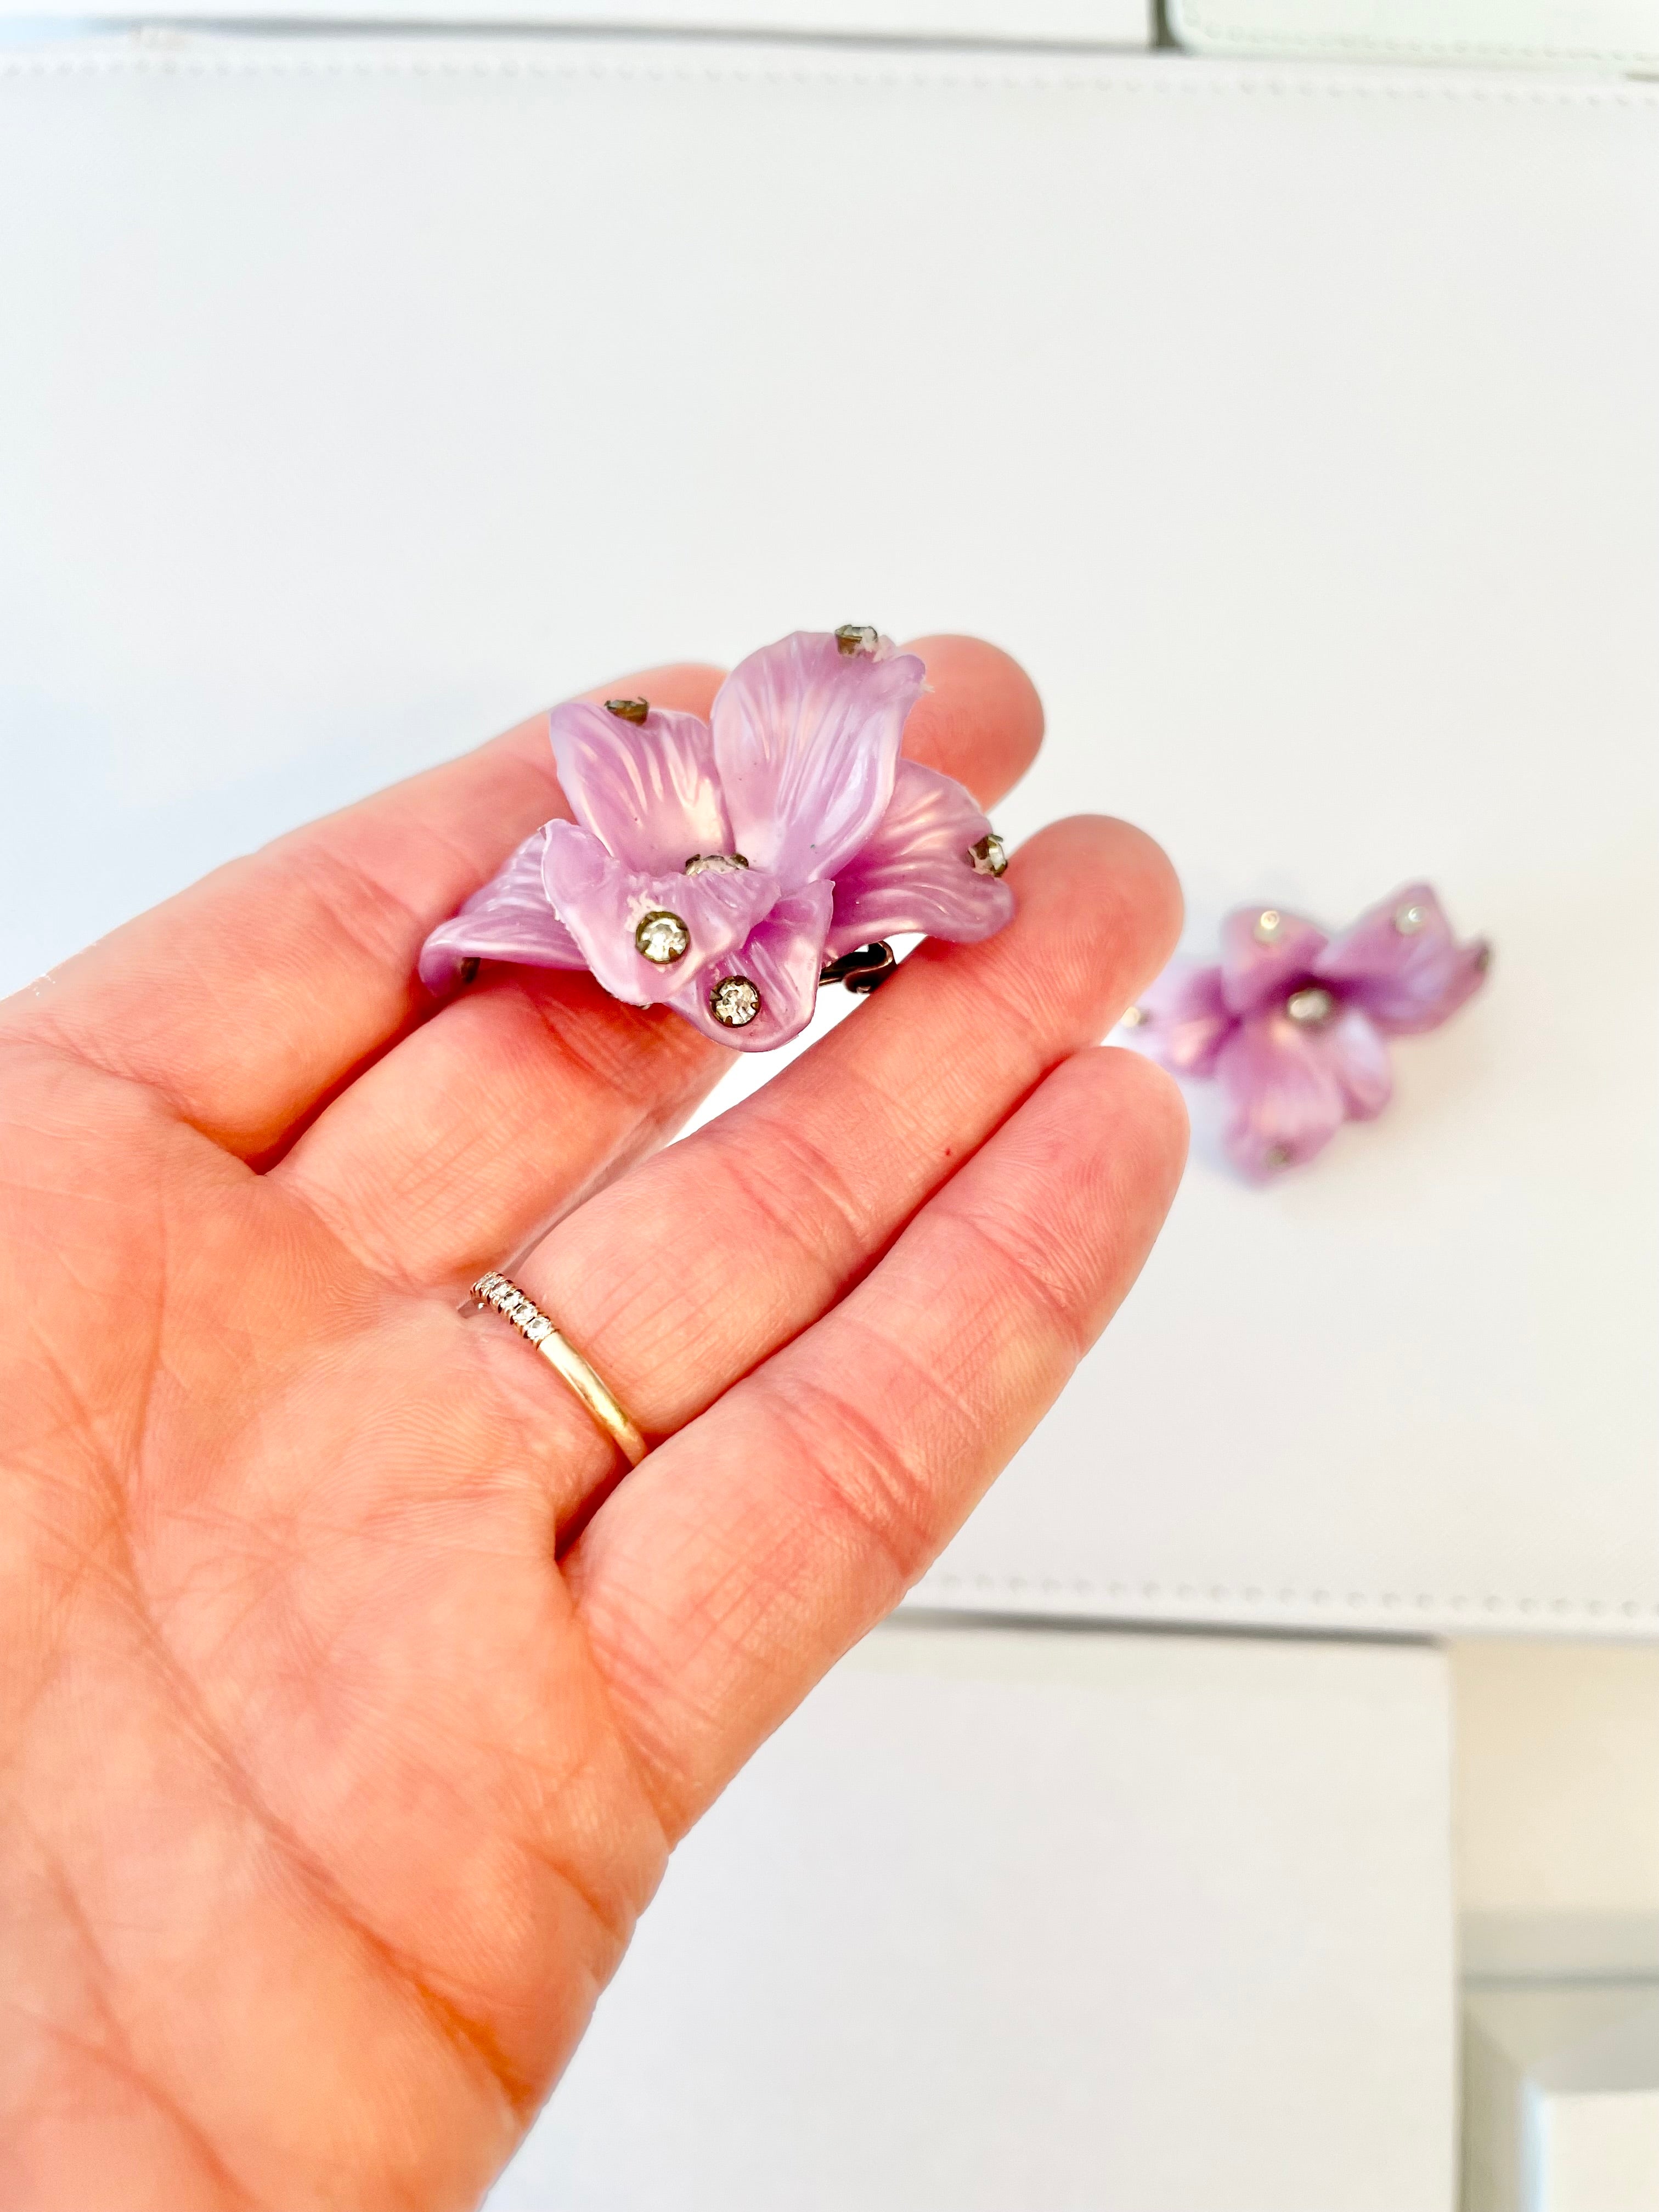 These 1960's divine purple sculpted flowers are truly something! .... so chic